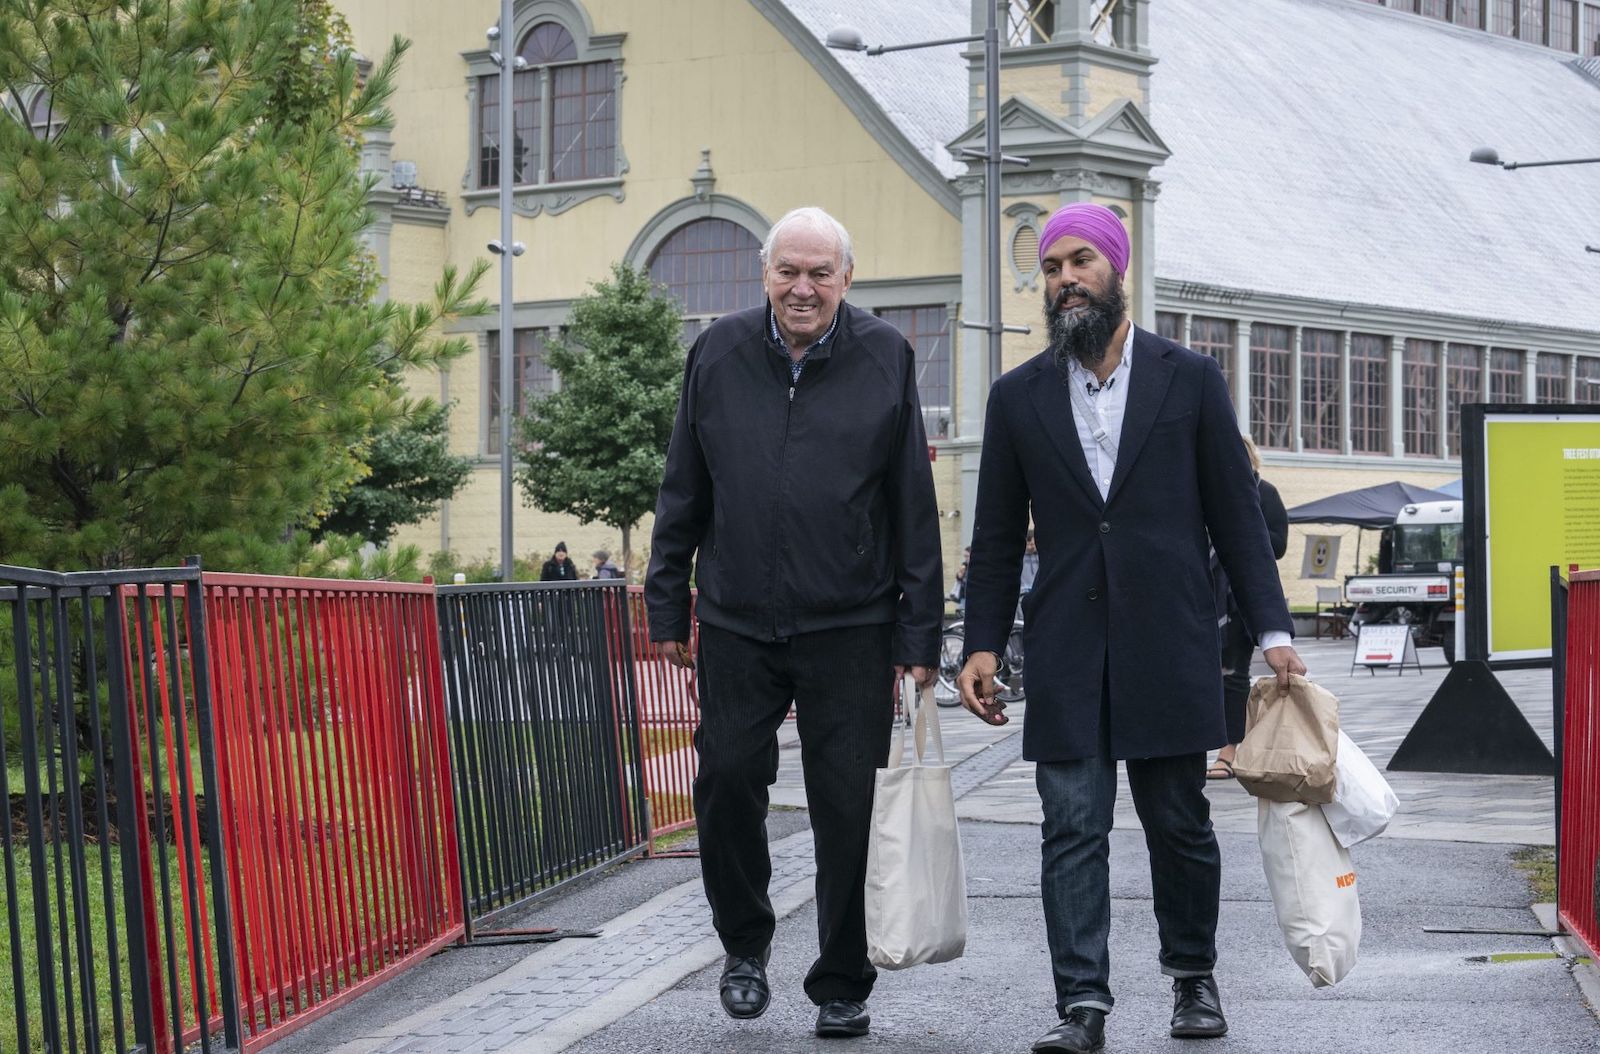 Ed Broadbent, on the left, with thinning white hair, dressed all in black and carrying a canvas shopping bag, and Jagmeet Singh, bearded, wearing a purple turban, a long black coat and jeans and carrying three shopping bags in one hand, walk side by side in front of a large beige building with multiple paned windows.